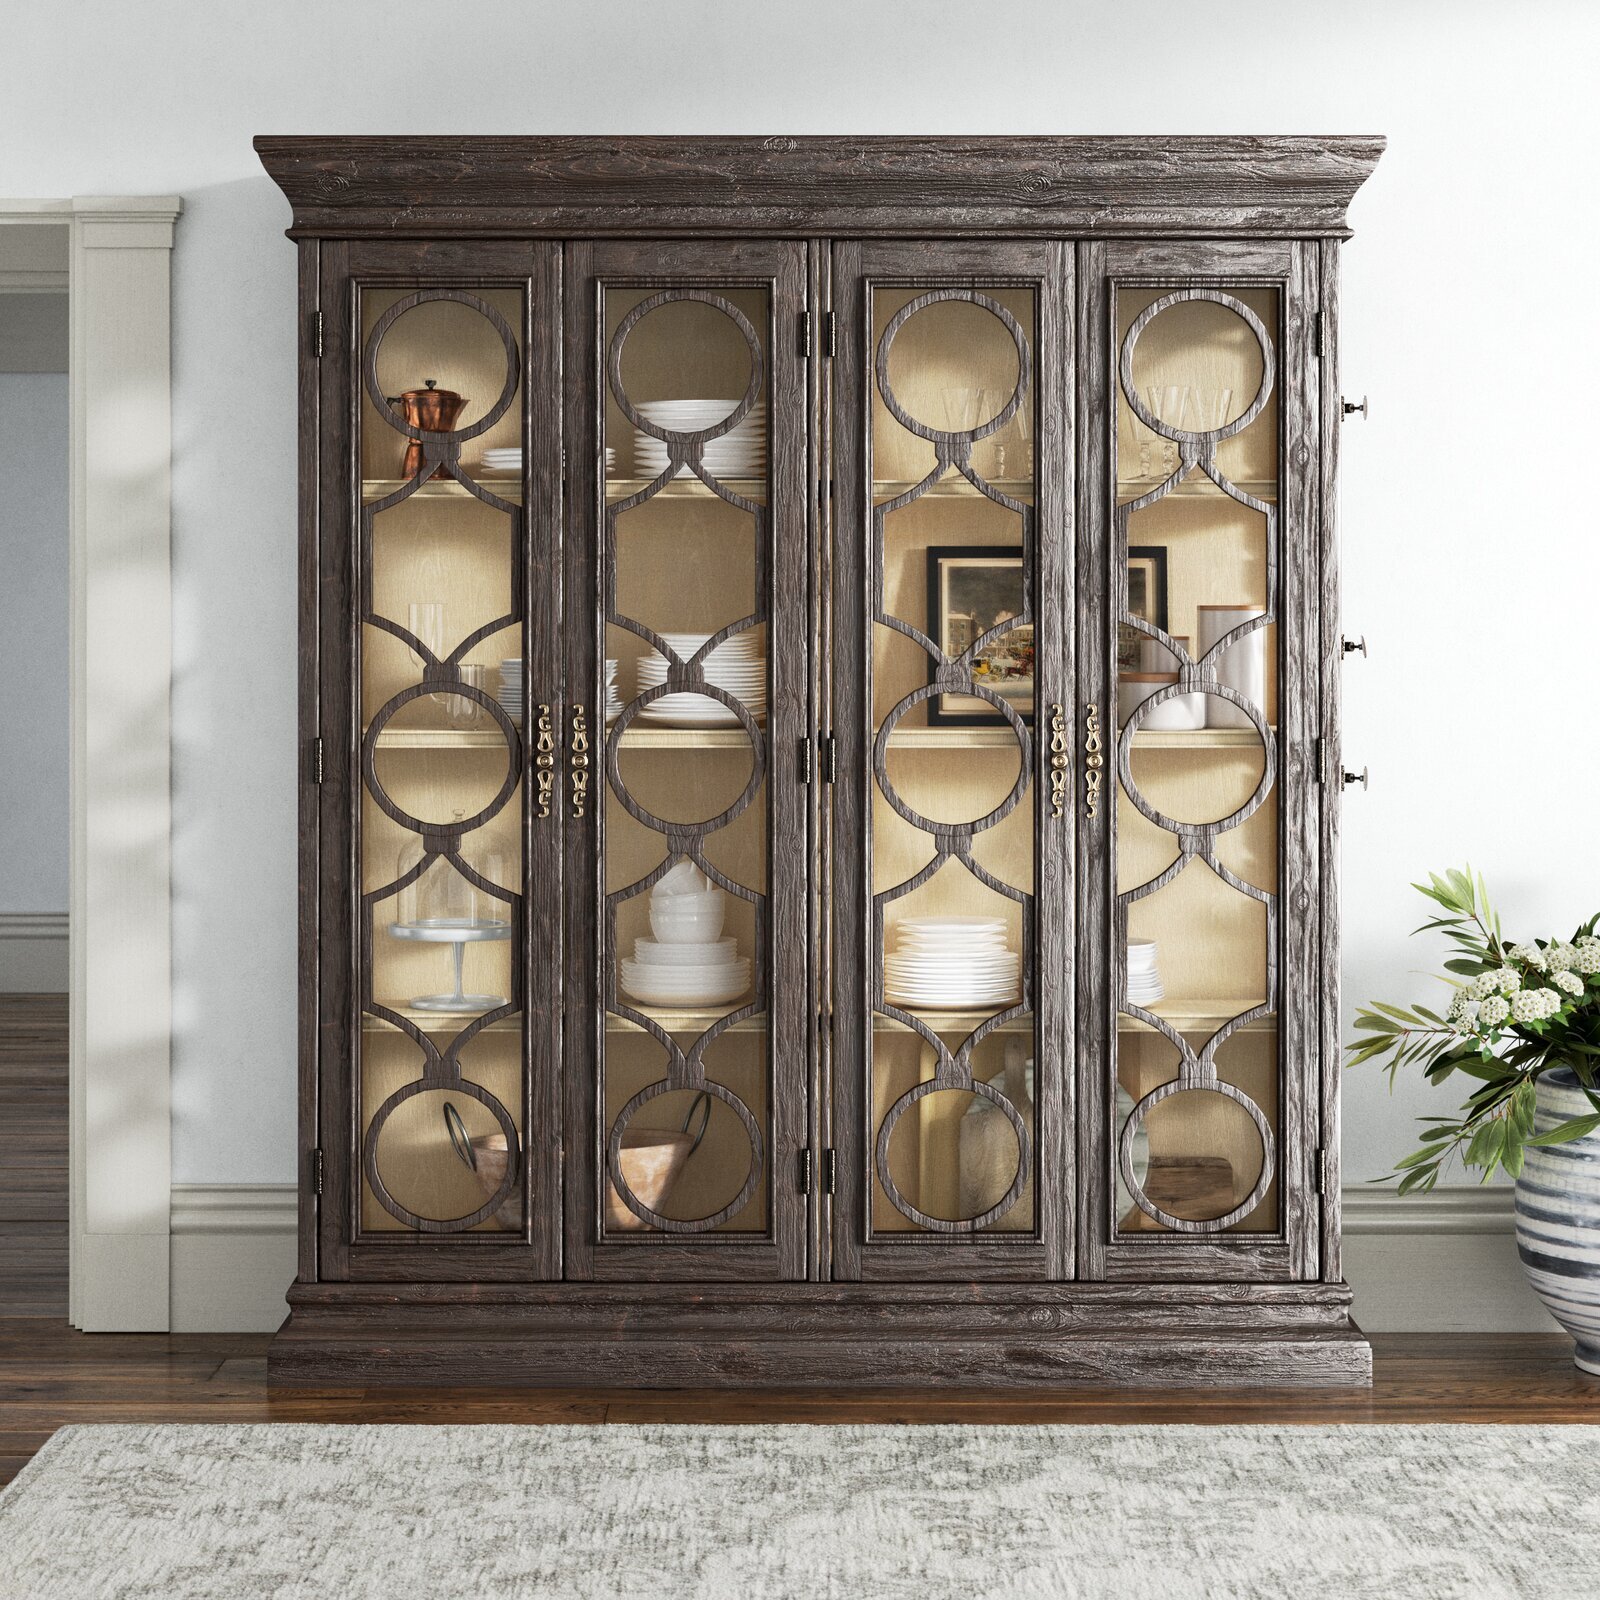 Extra large antique curio cabinets